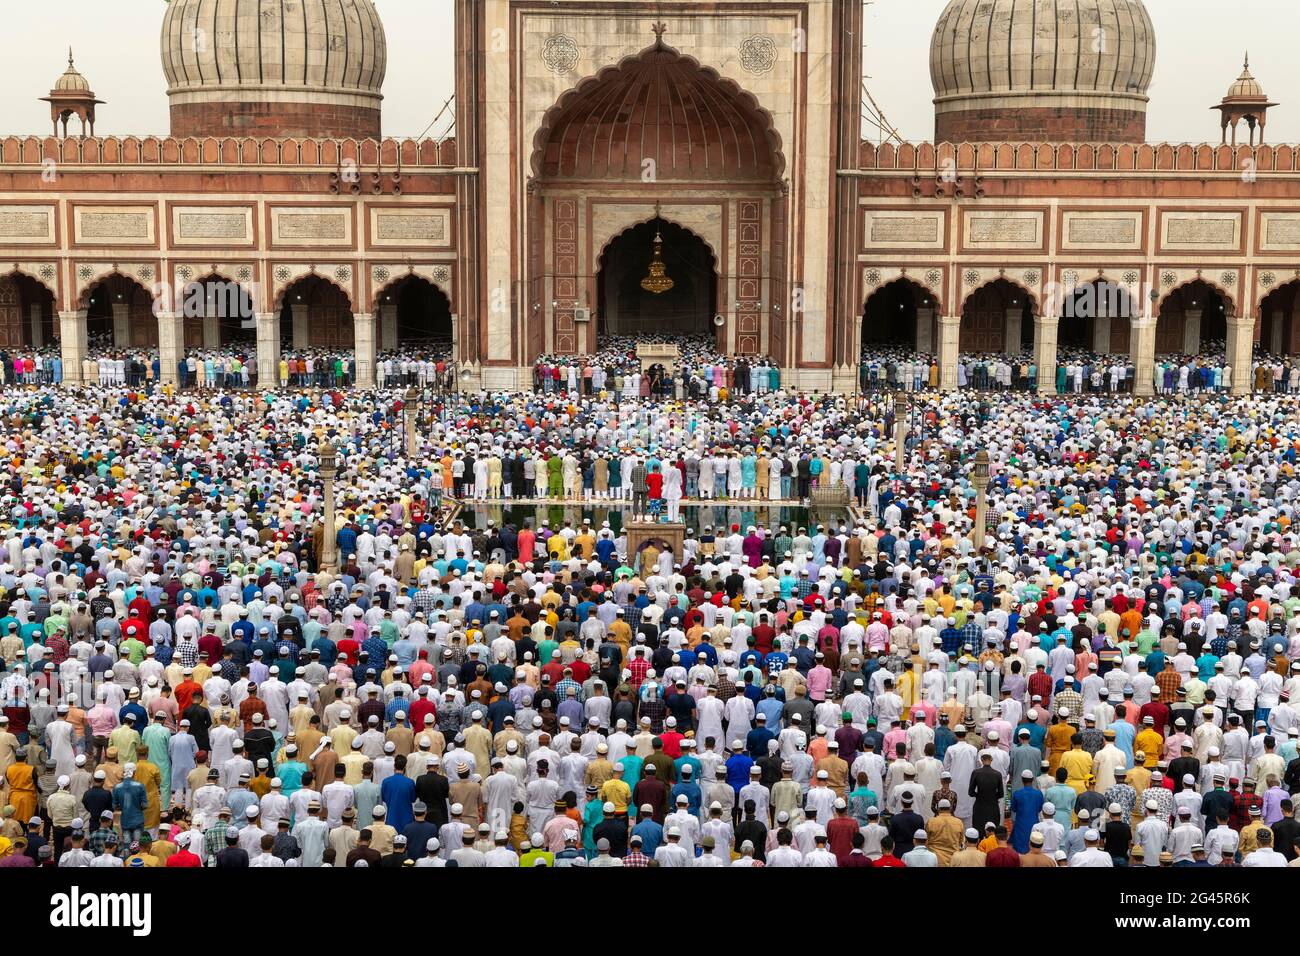 Thousands of Muslim men offers Eid-ul-fitr namaz at the Masjid-i Jehan-Numa or the Jama Masjid of Delhi. It is one of the largest mosques in India, Stock Photo